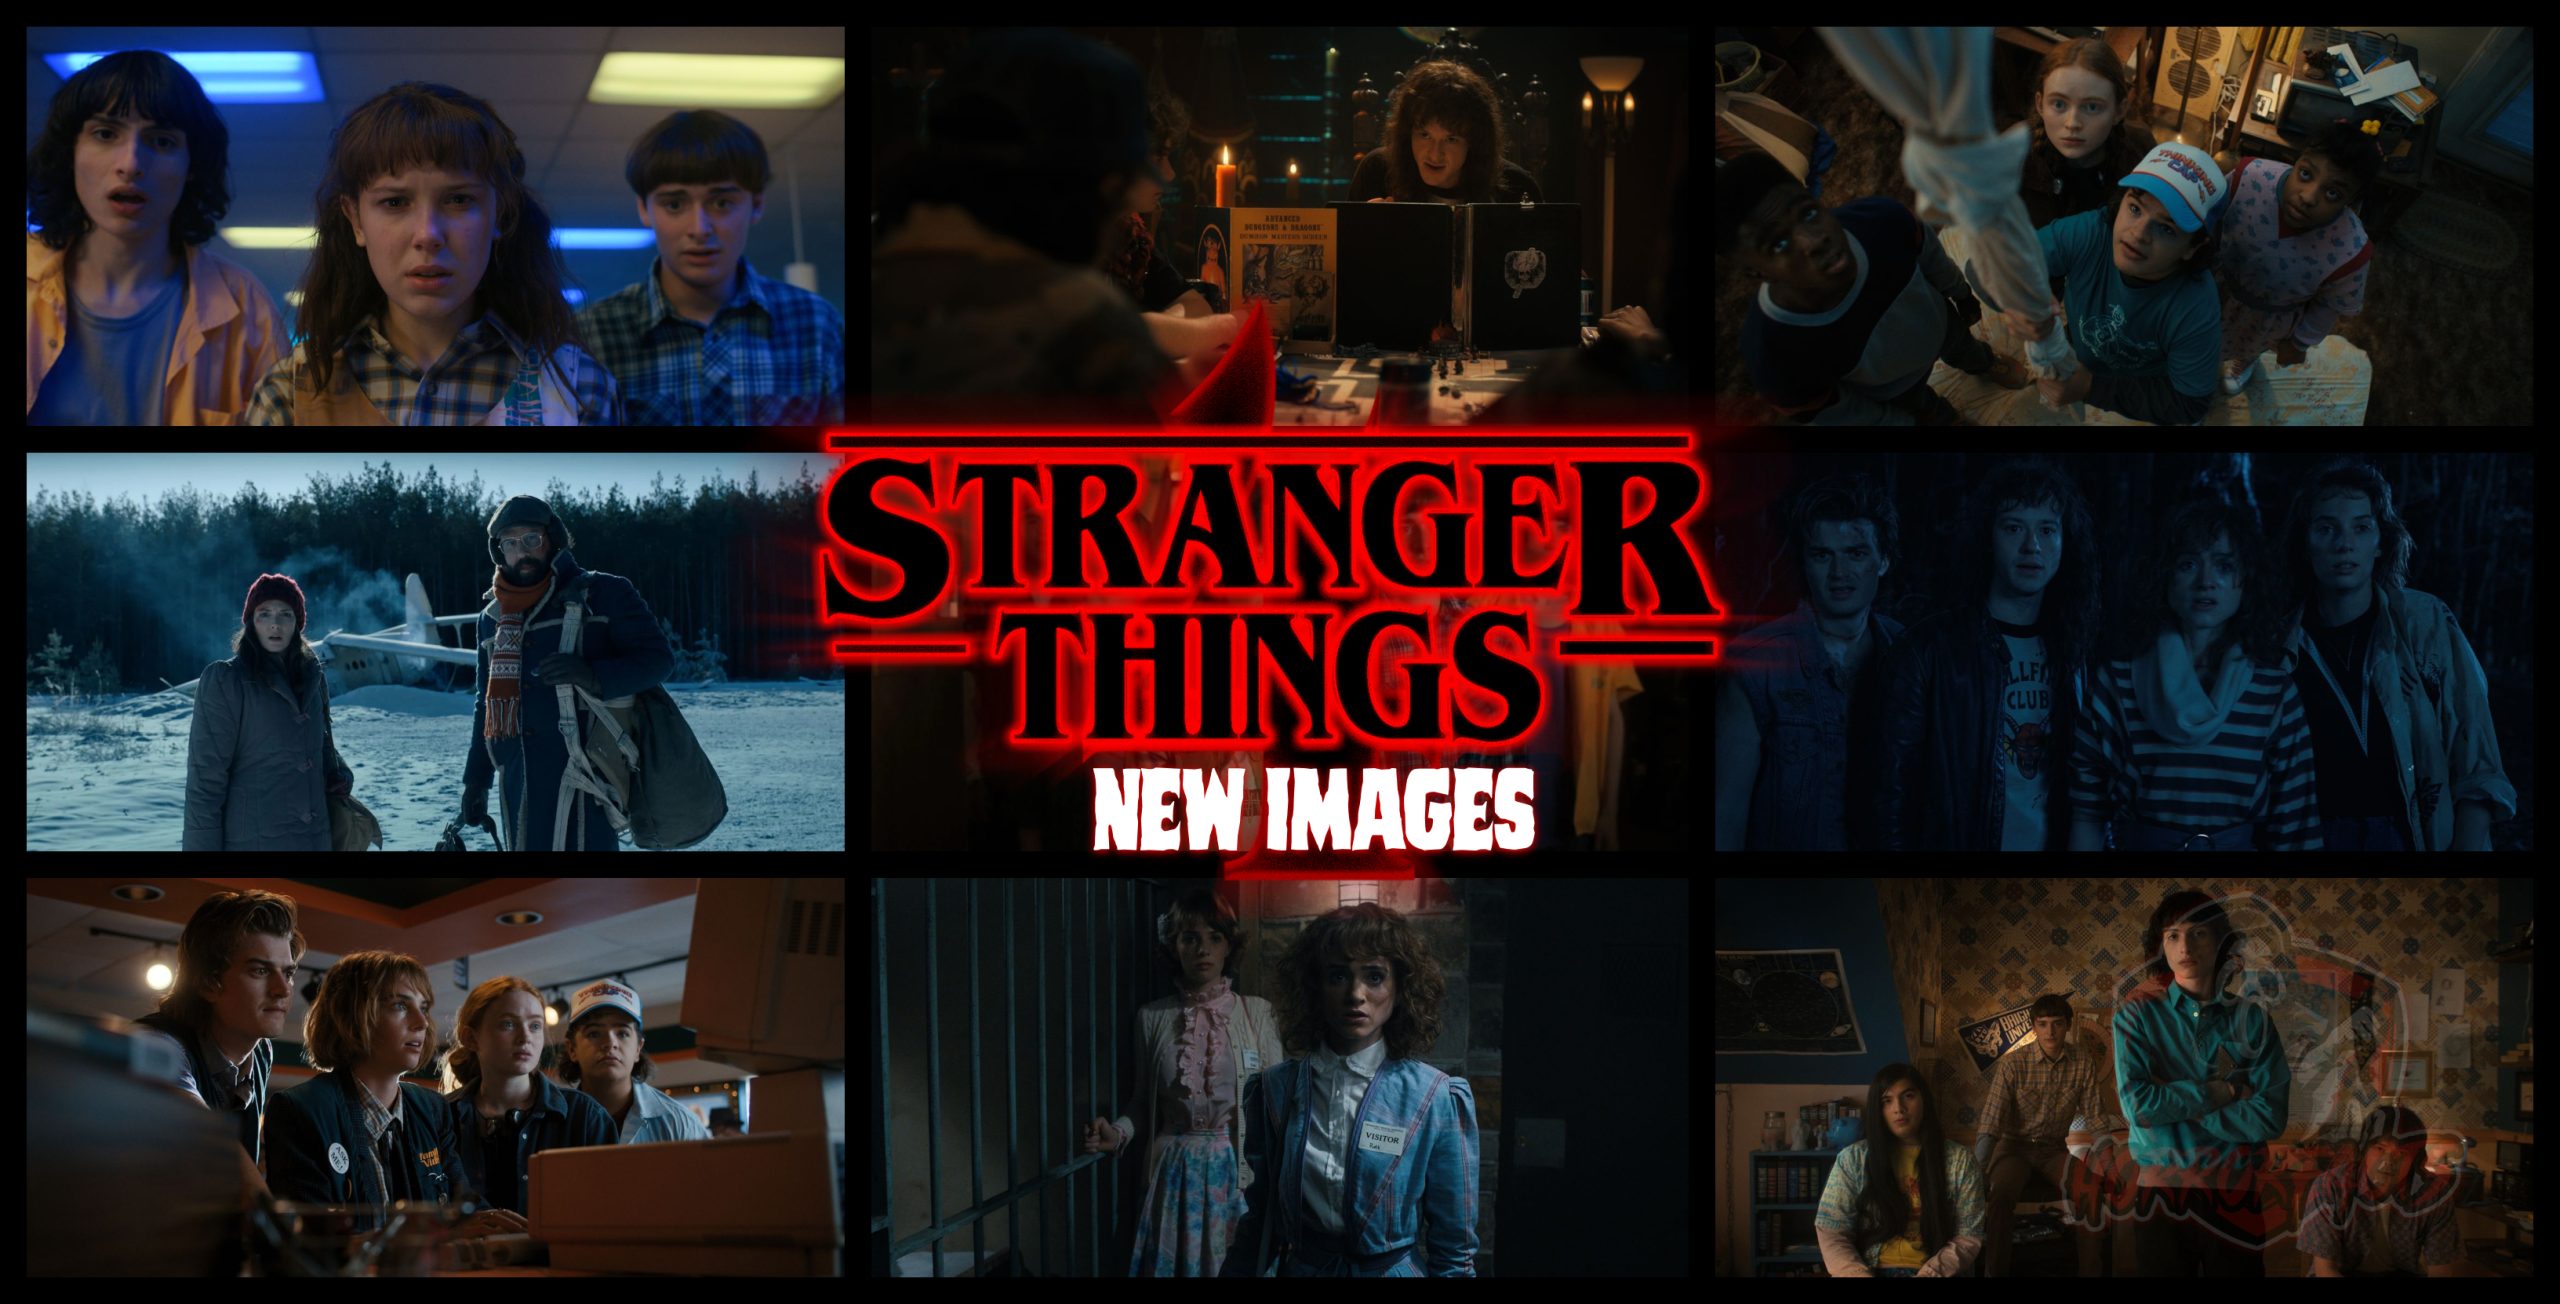 Stranger Things Season 4 Image Are here, Check Out The Sneak Peek